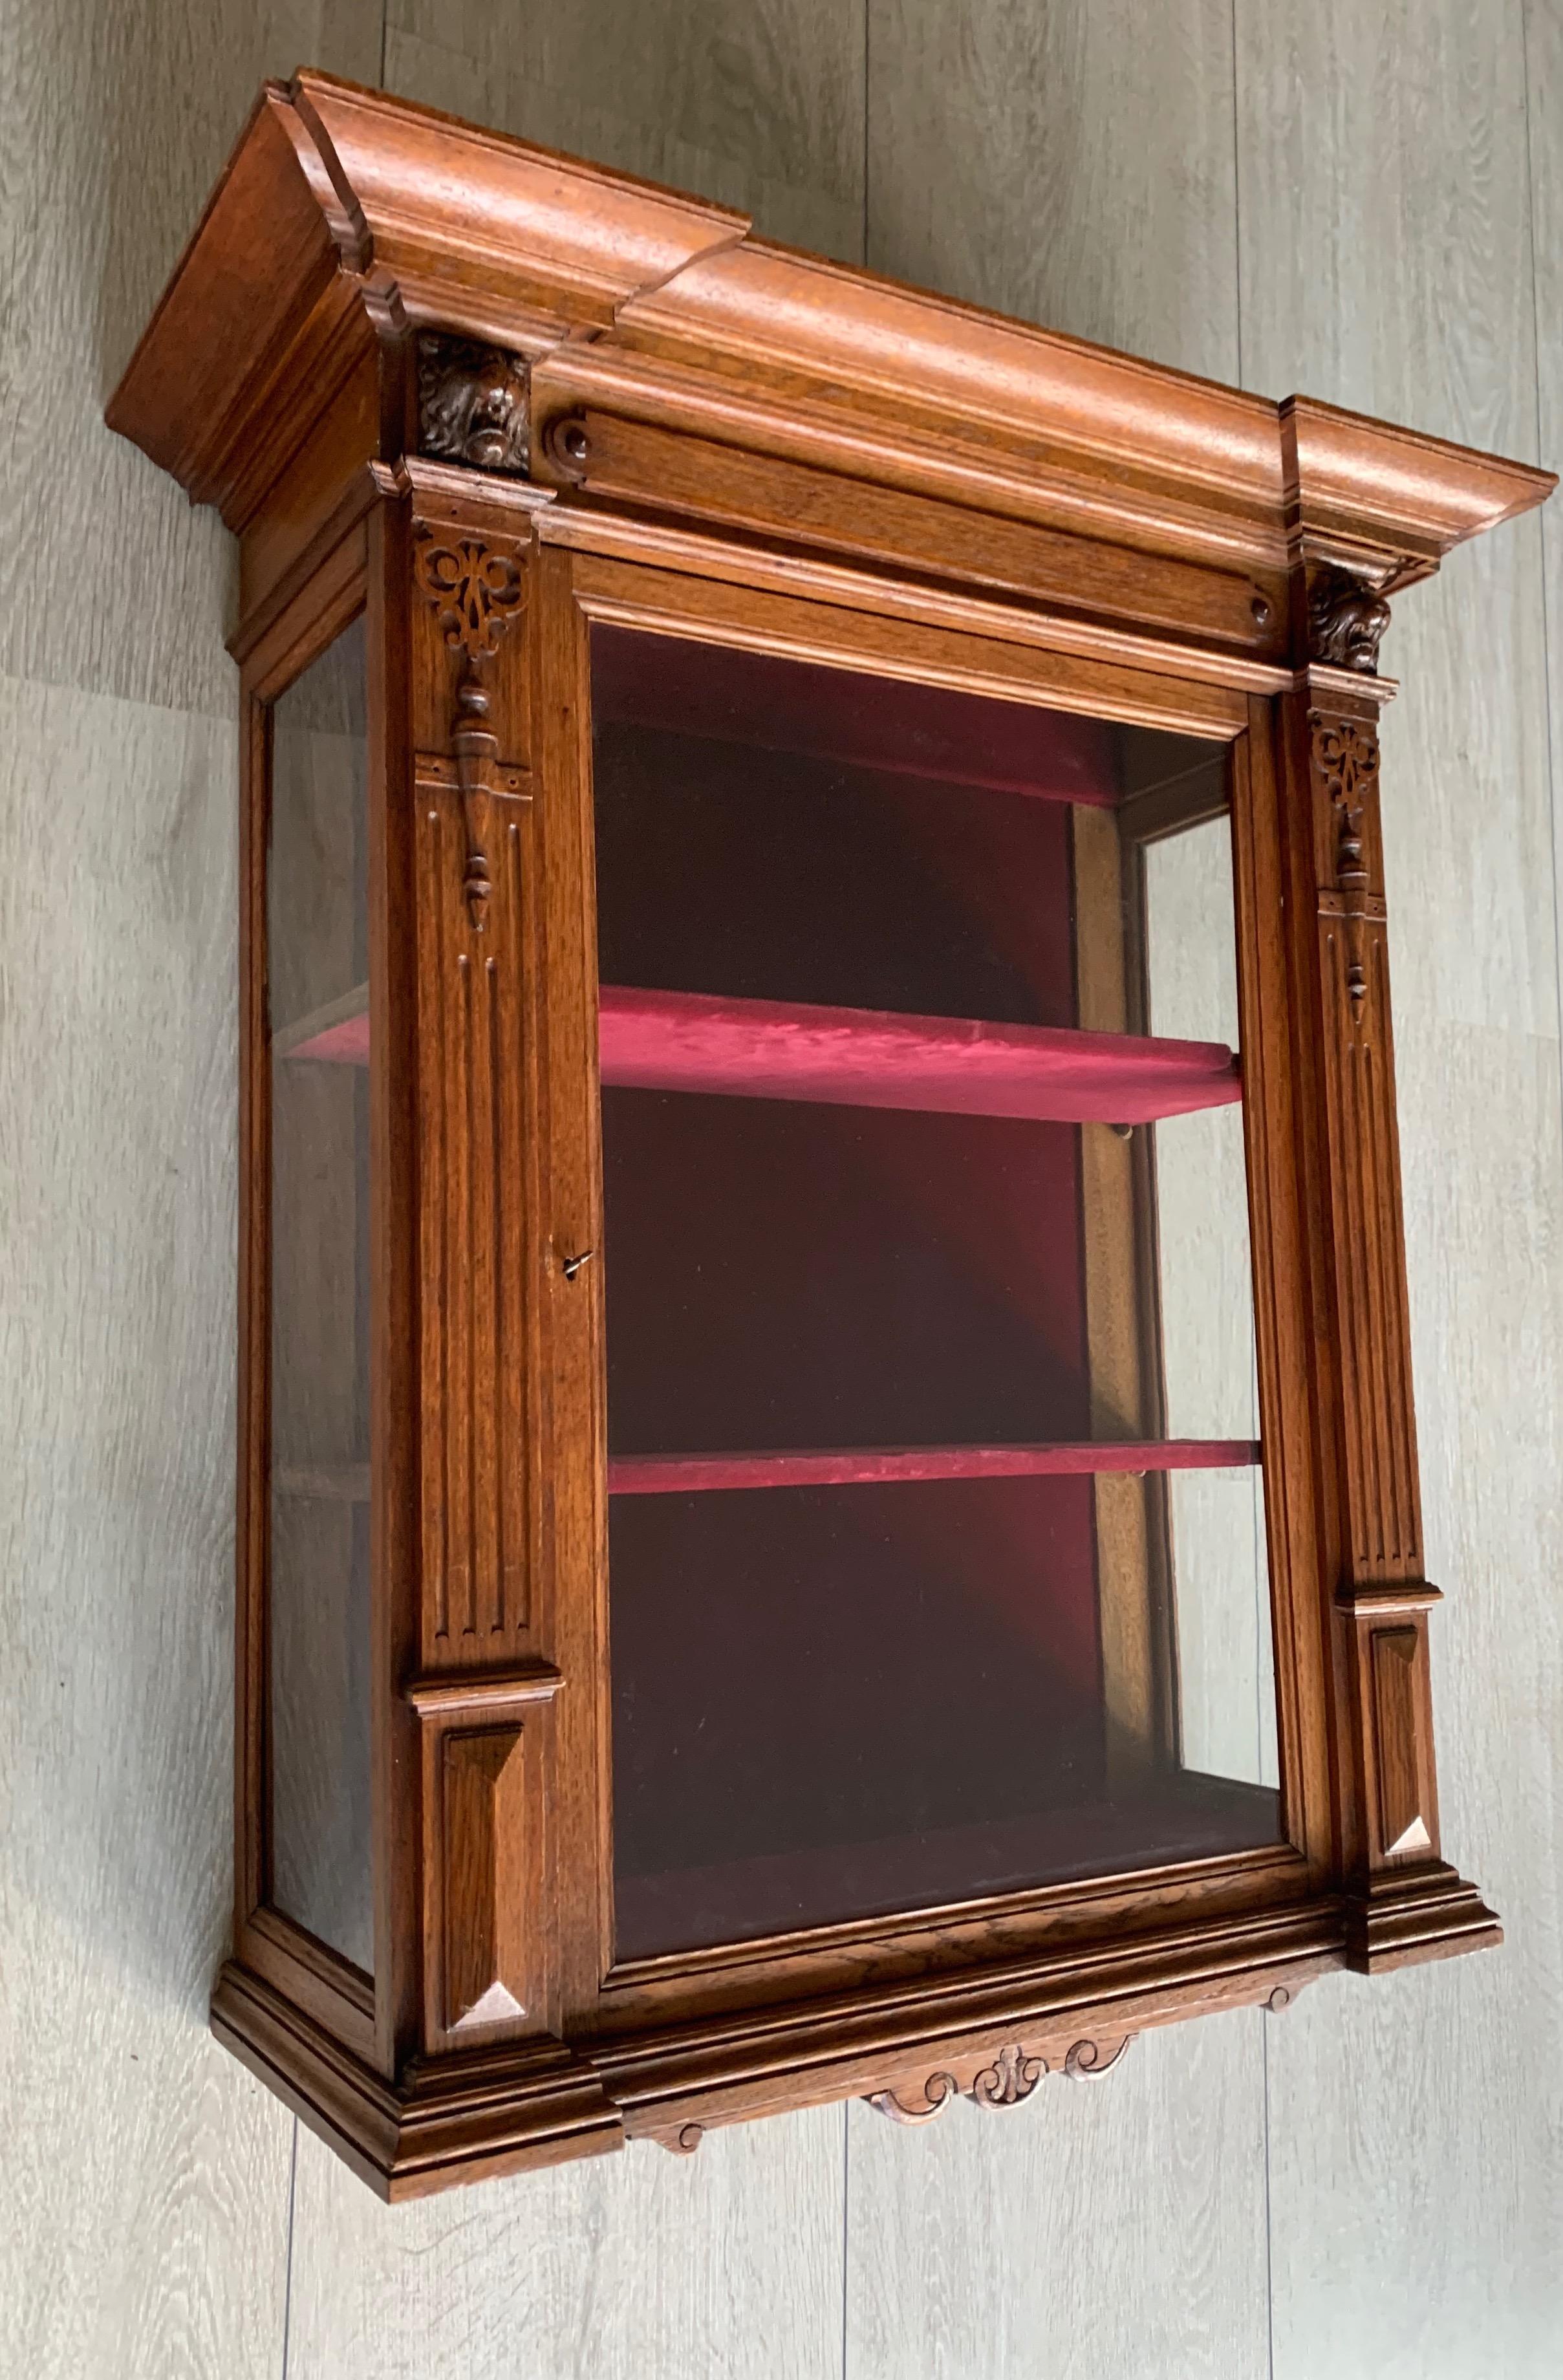 Beautifully handcrafted cabinet with a red velvet interior.

This finest quality 19th century, single door wall cabinet with its original glass panel is a work of art in its own right and it is in excellent condition. This good sized antique is